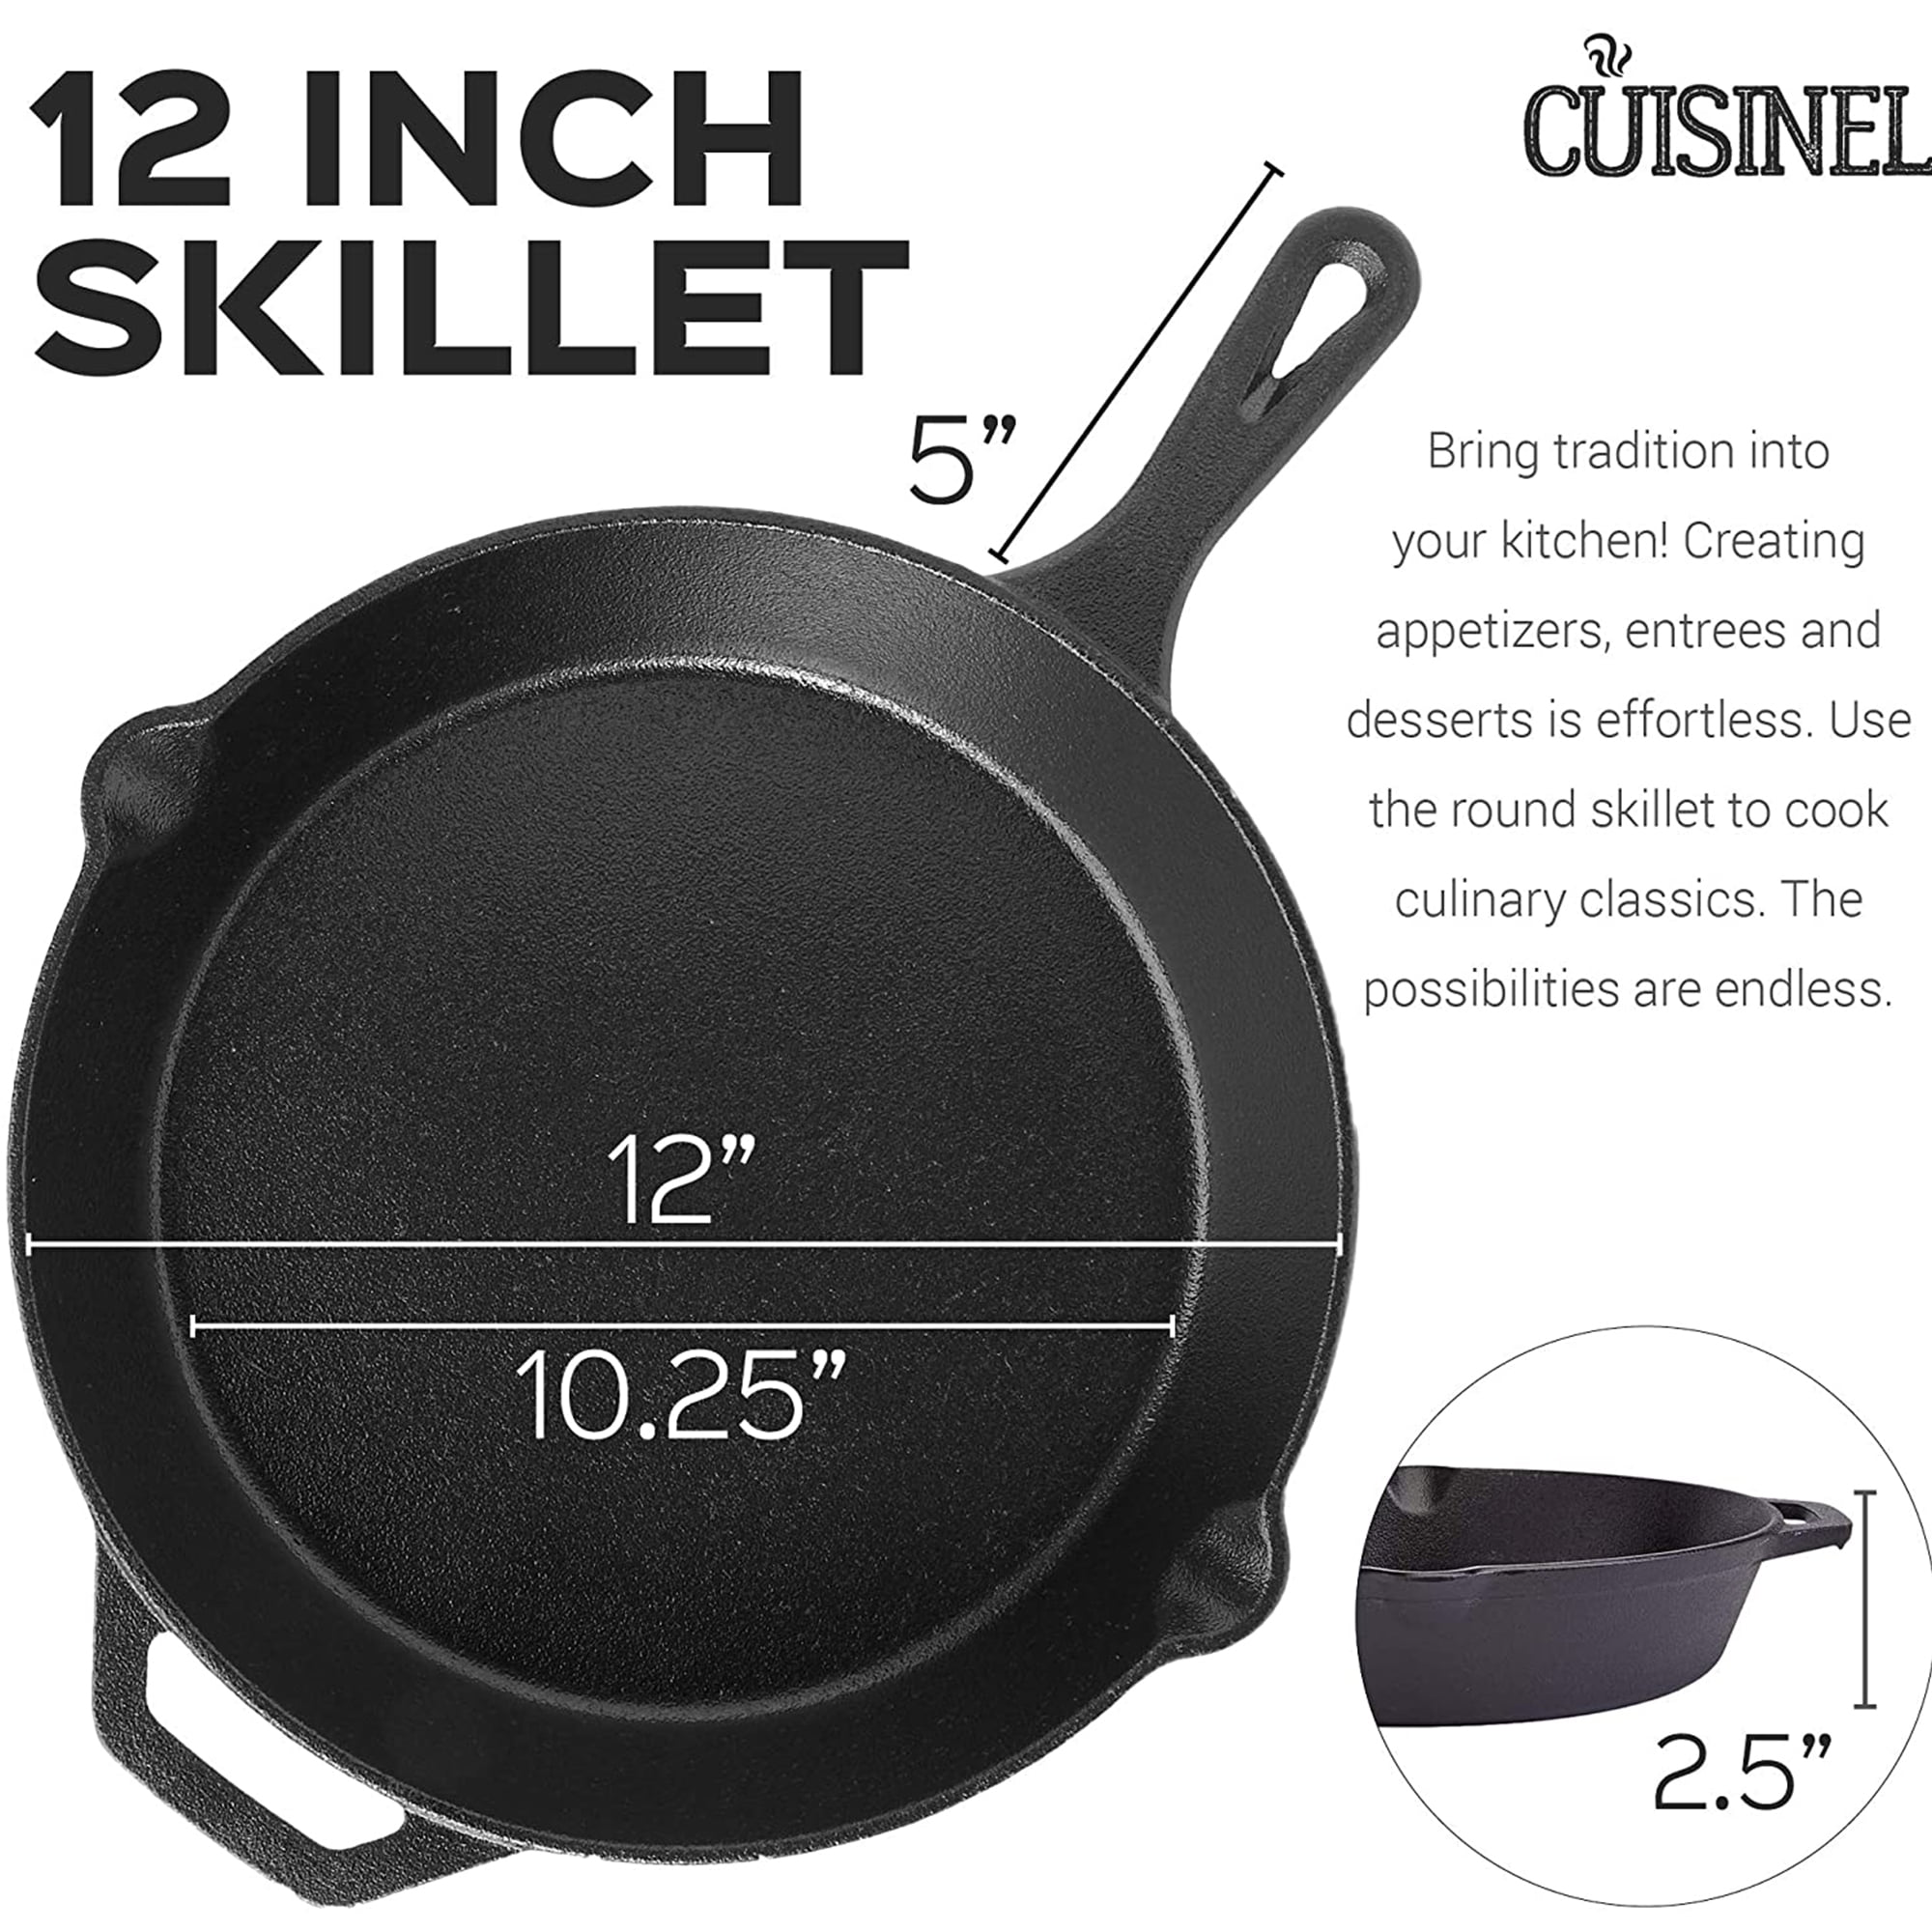  Cuisinel Cast Iron Skillet - 12-Inch Frying Pan with Assist  Handle and Pour Spouts + Silicone Grip Holder Cover - Preseasoned Oven Safe  Cookware - Indoor/Outdoor Use - Grill, Stovetop Safe